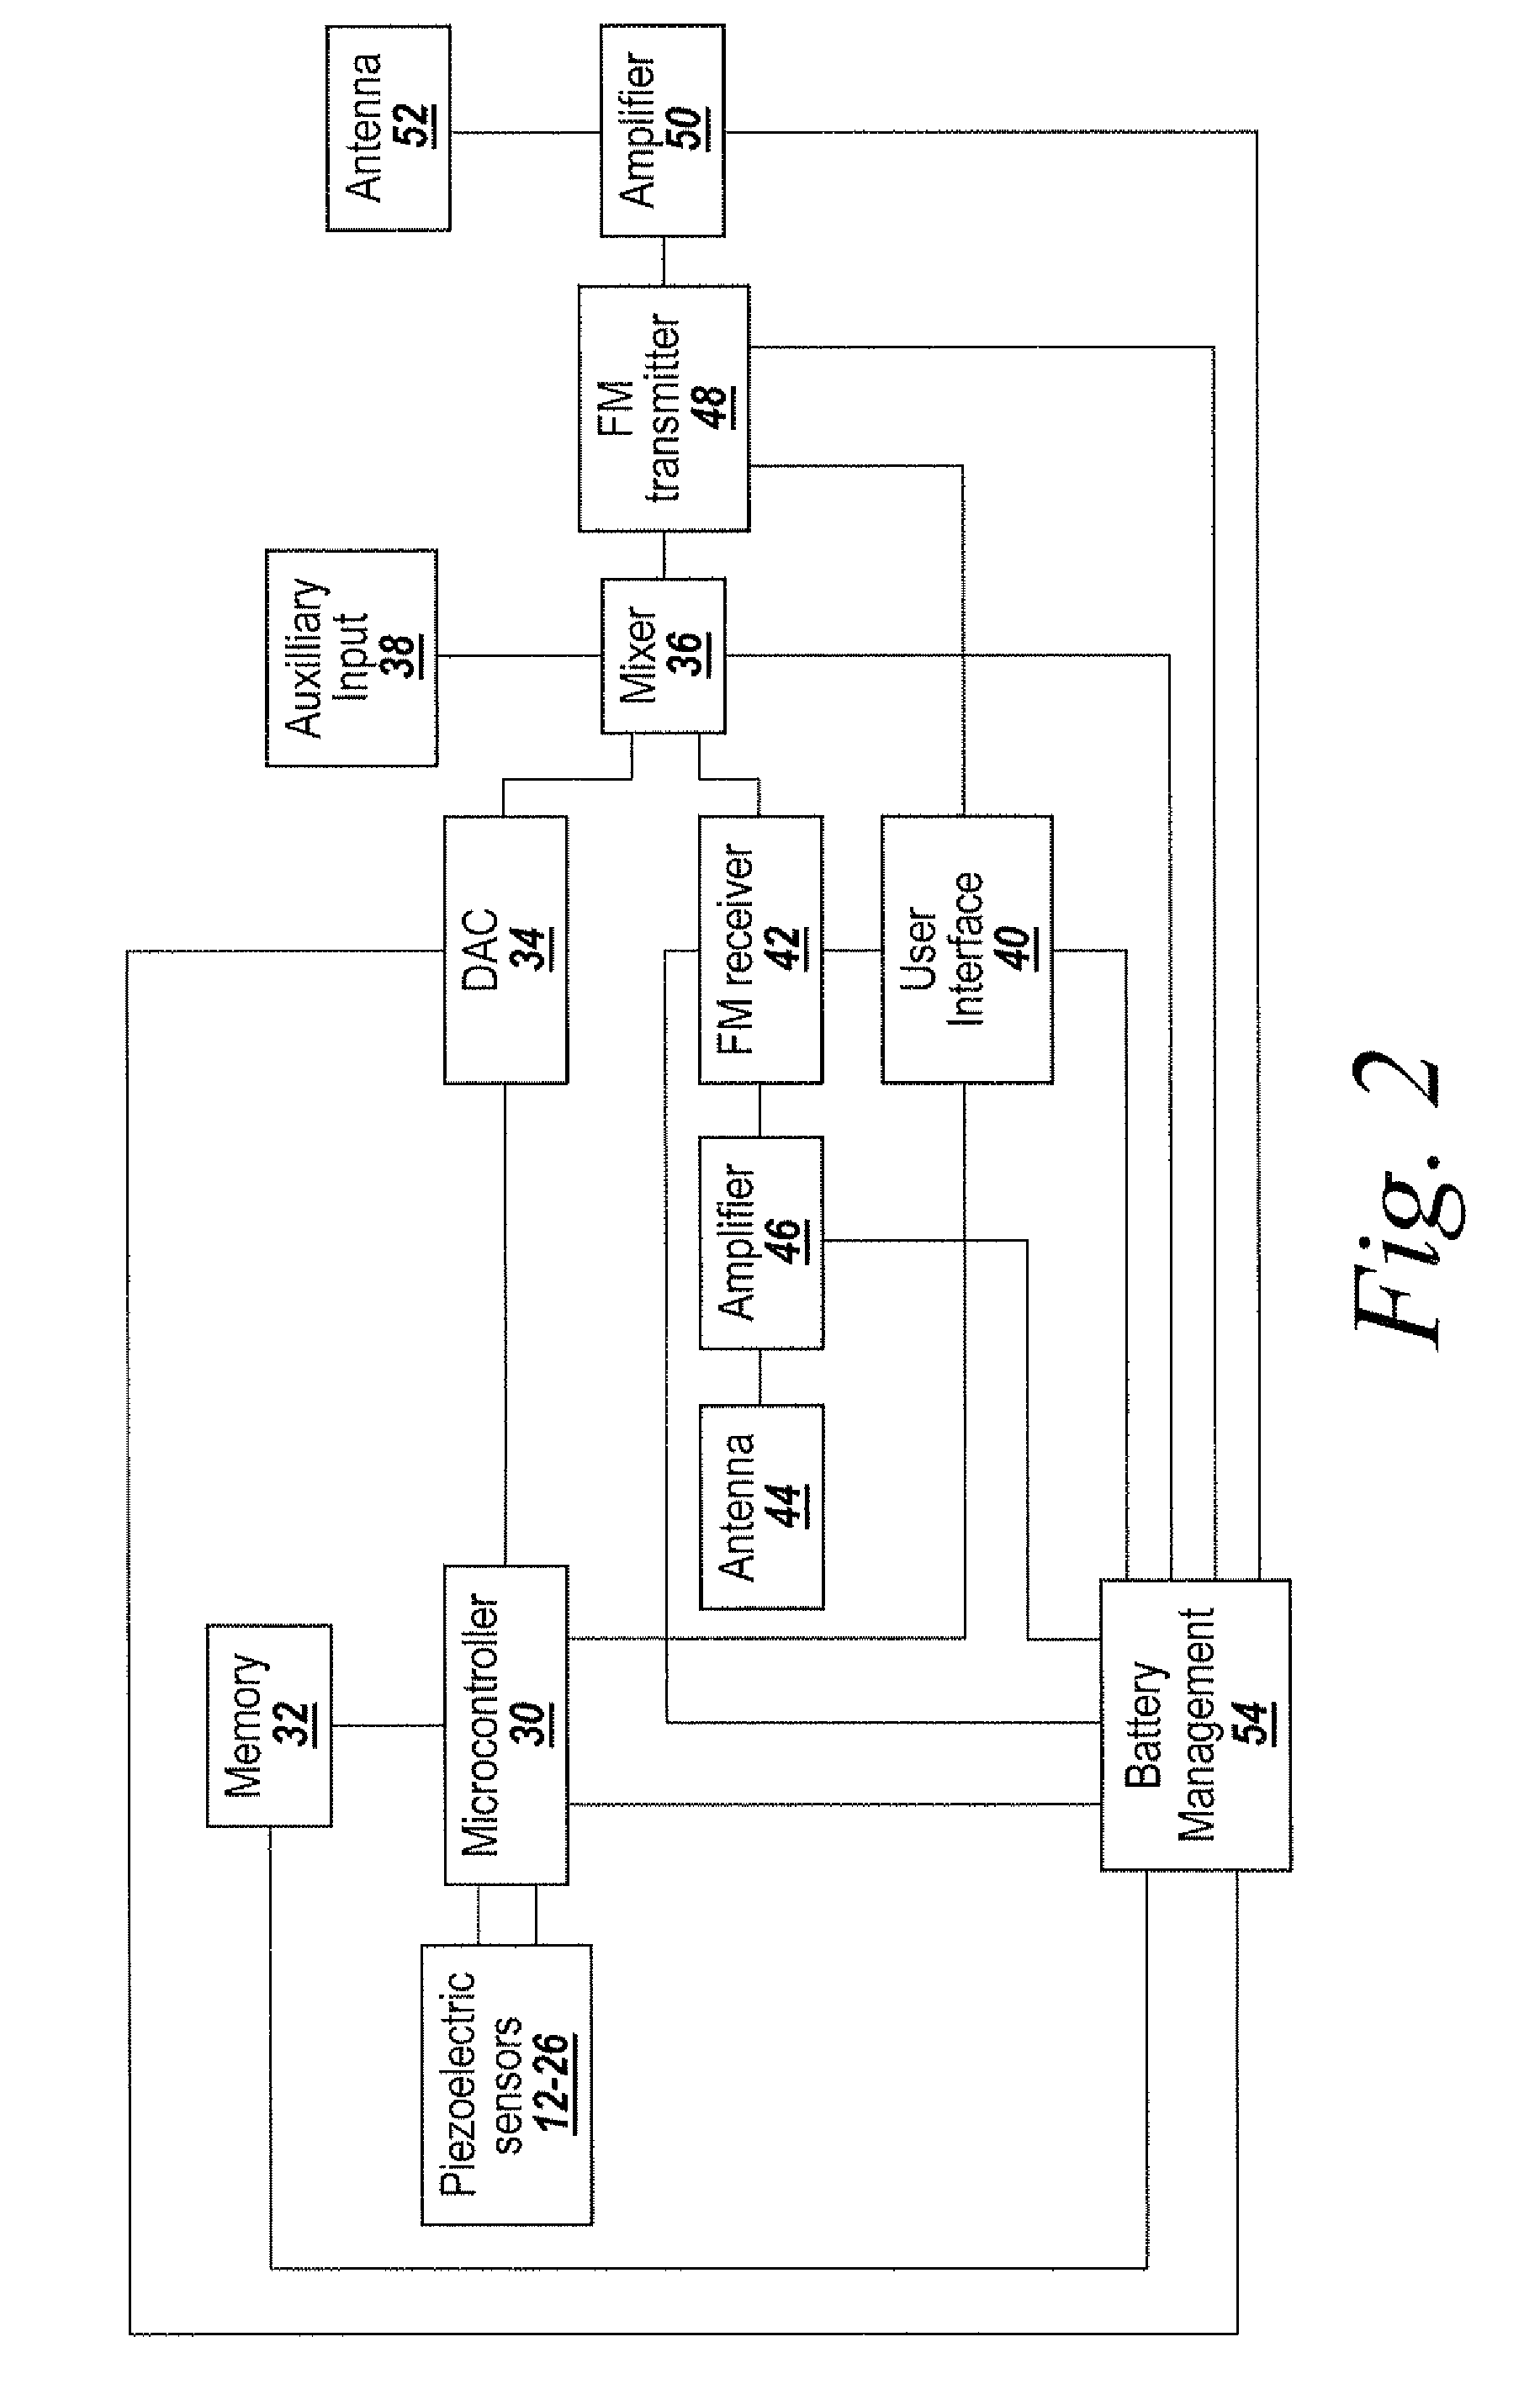 System for generating musical sounds within a vehicle